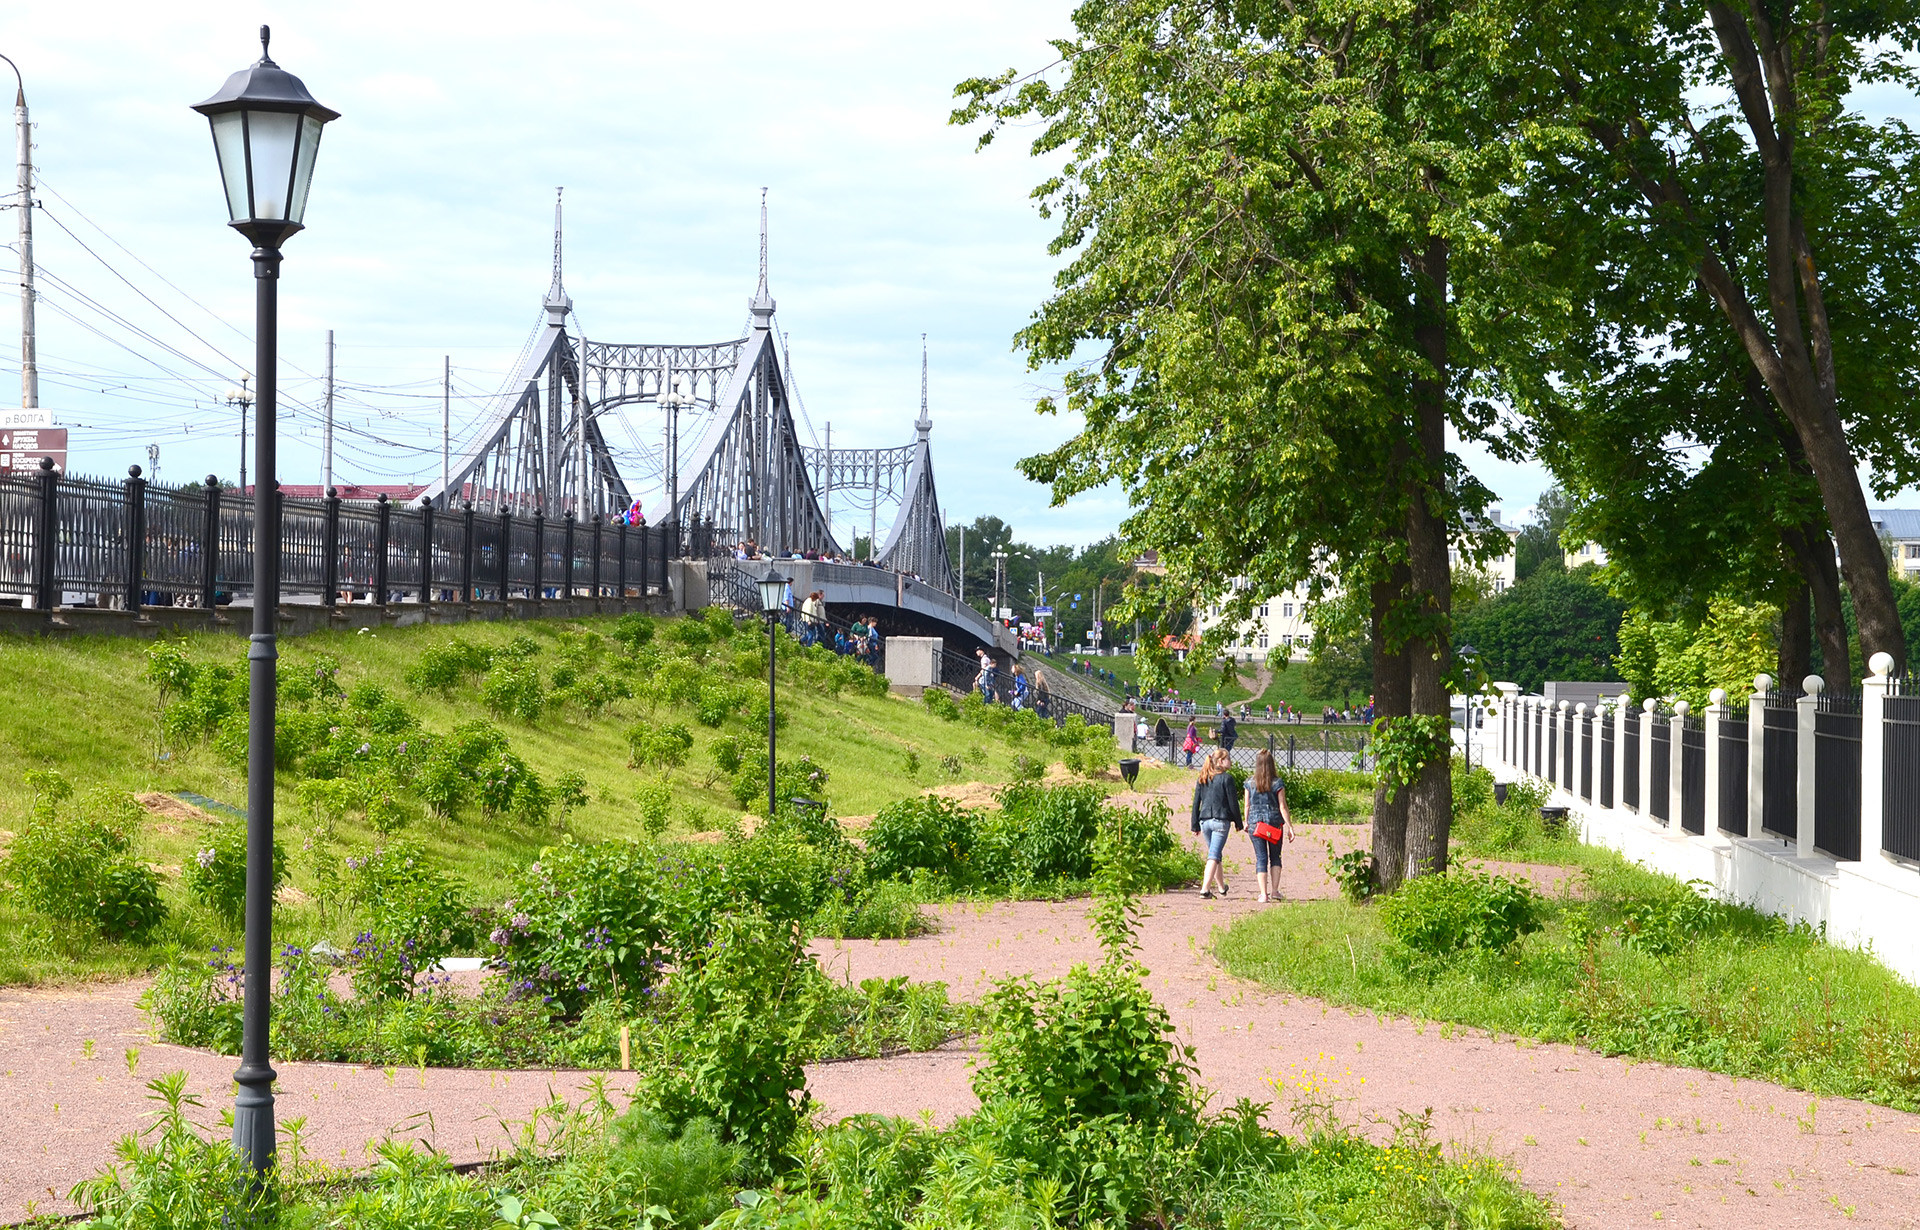 Tver's 'Old Bridge' is a copy of the famous metal bridge in the Hungarian capital, Budapest.